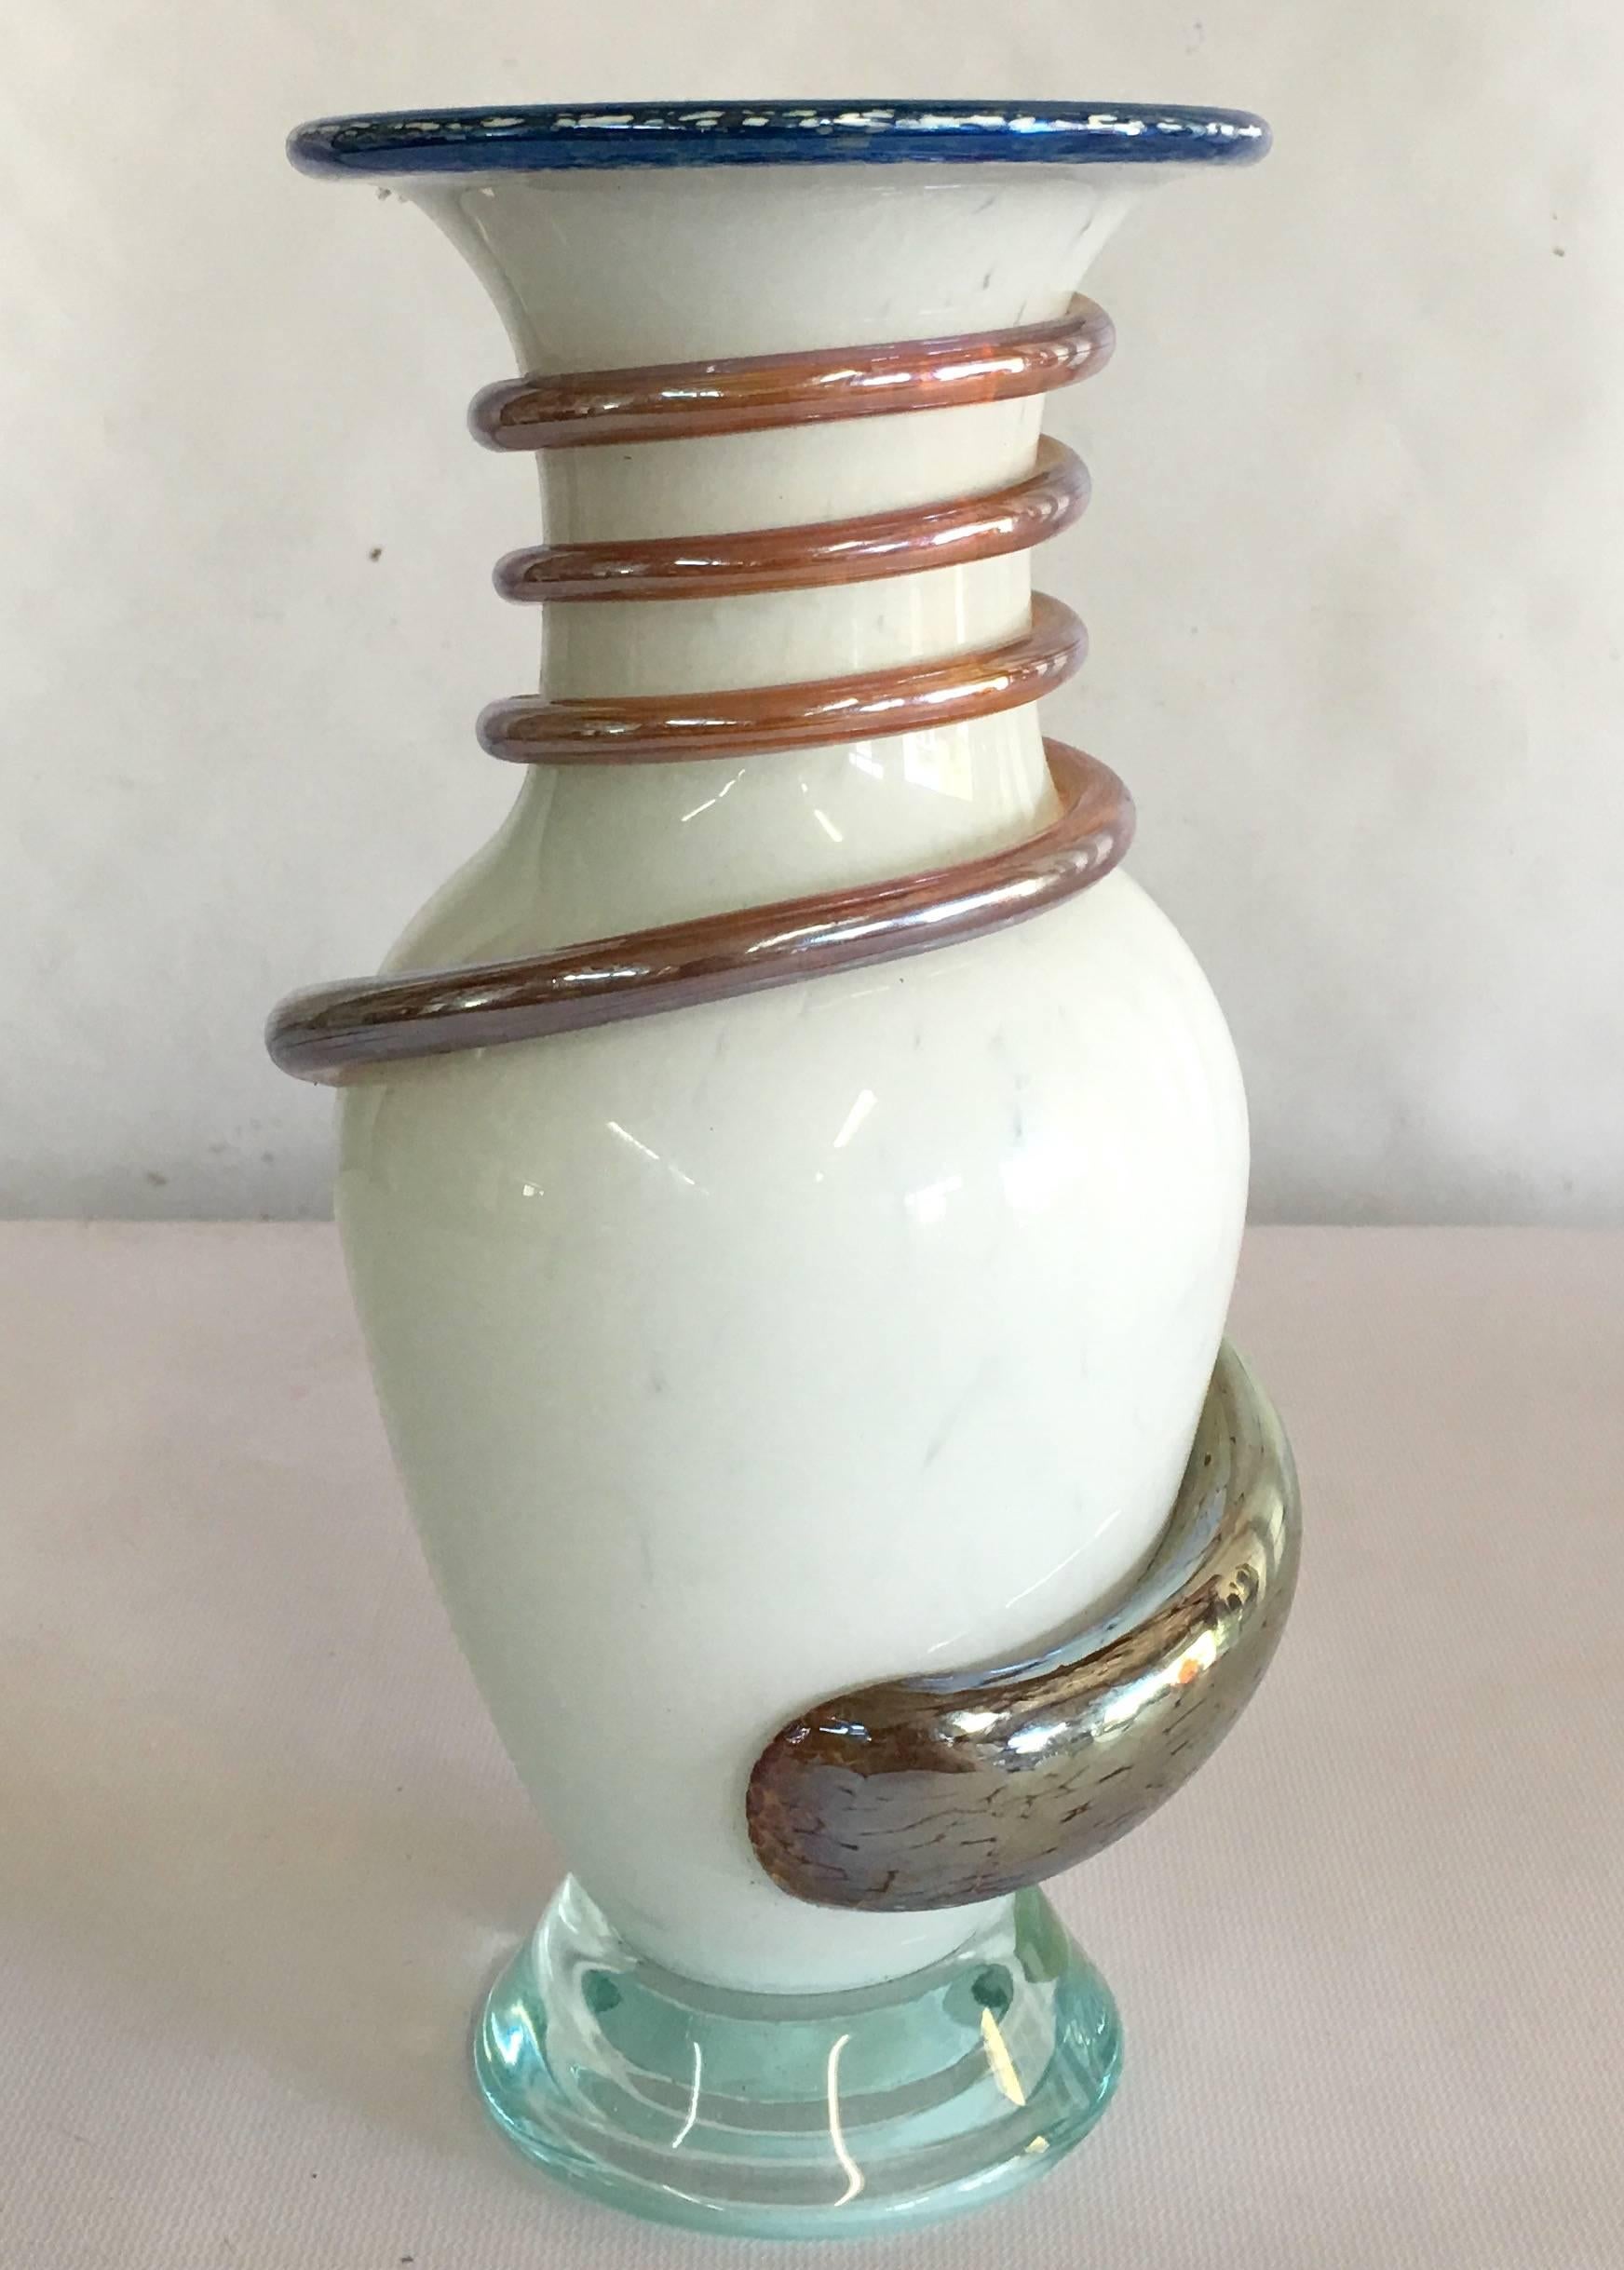 2003 Jeau Bishop handblown glass vase. This Classic vase is an original handblown glass art sculpture and signed on the front of the base, Jeau 2003.
 